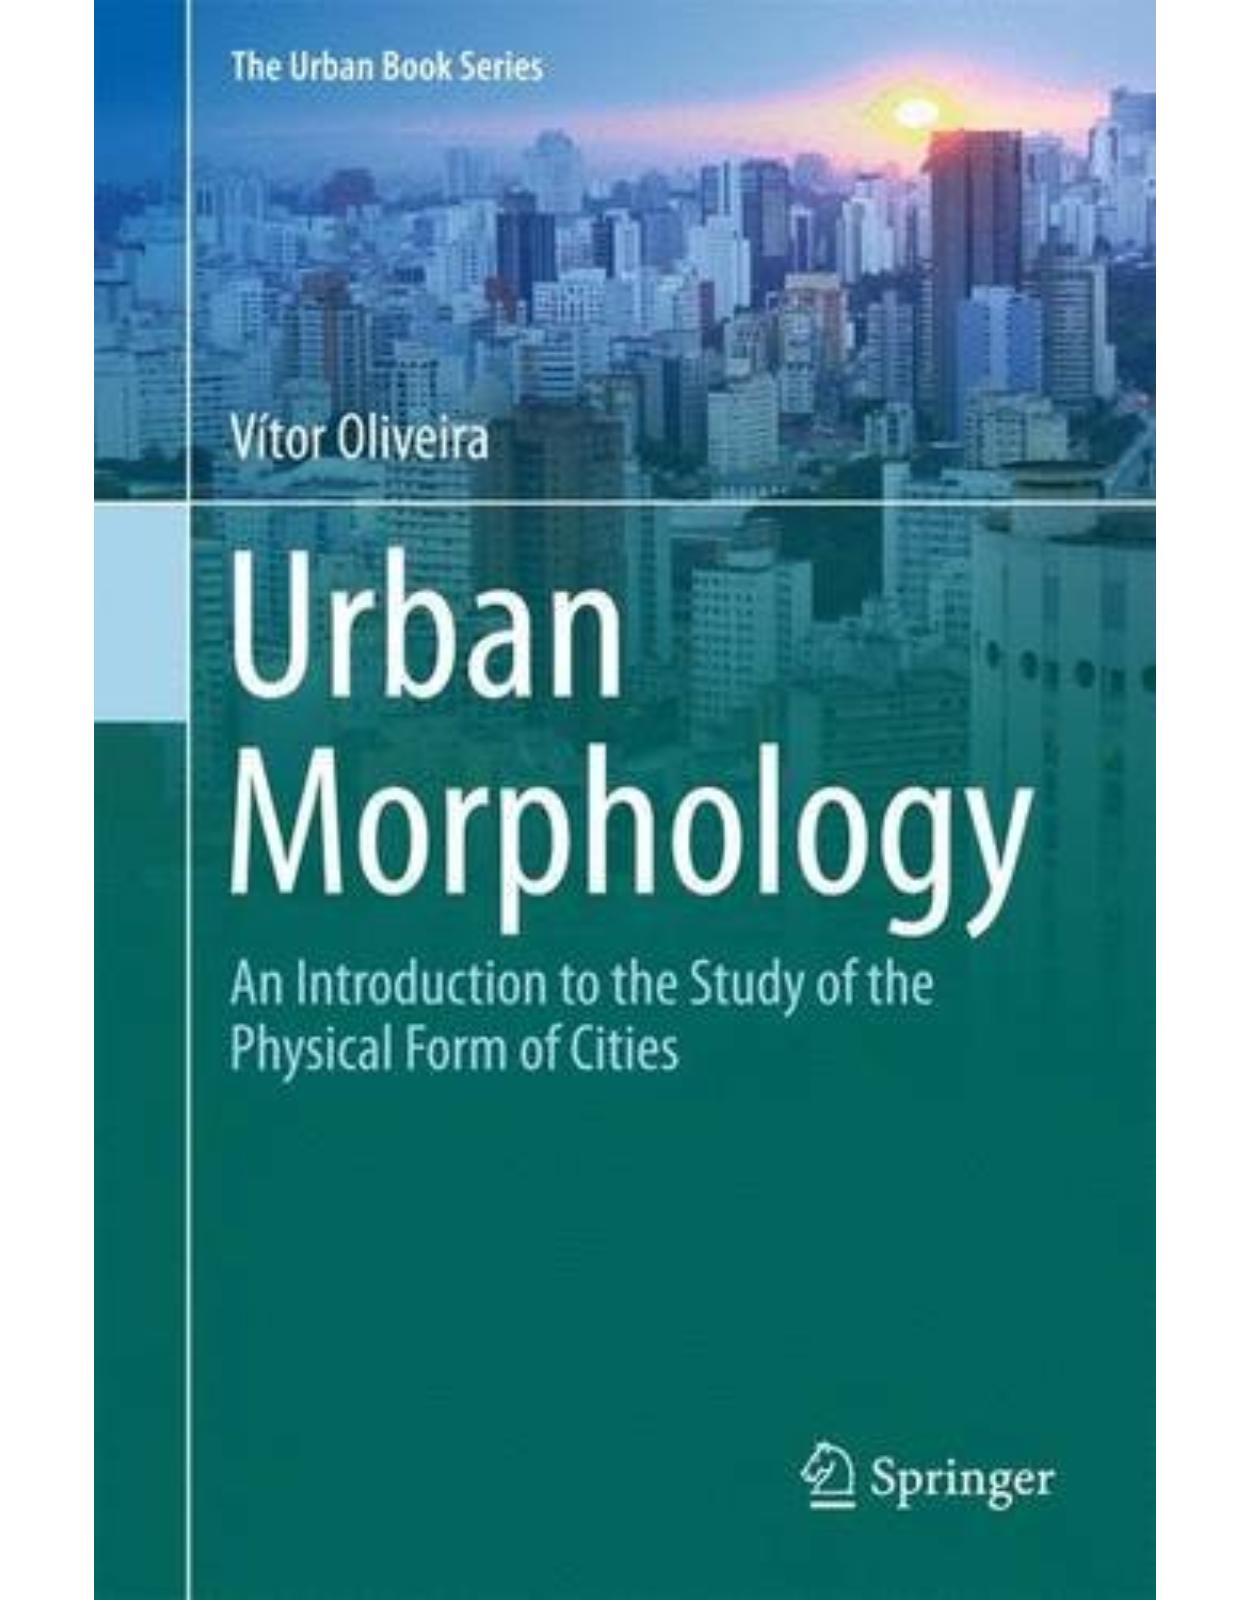 Urban Morphology: An Introduction to the Study of the Physical Form of Cities